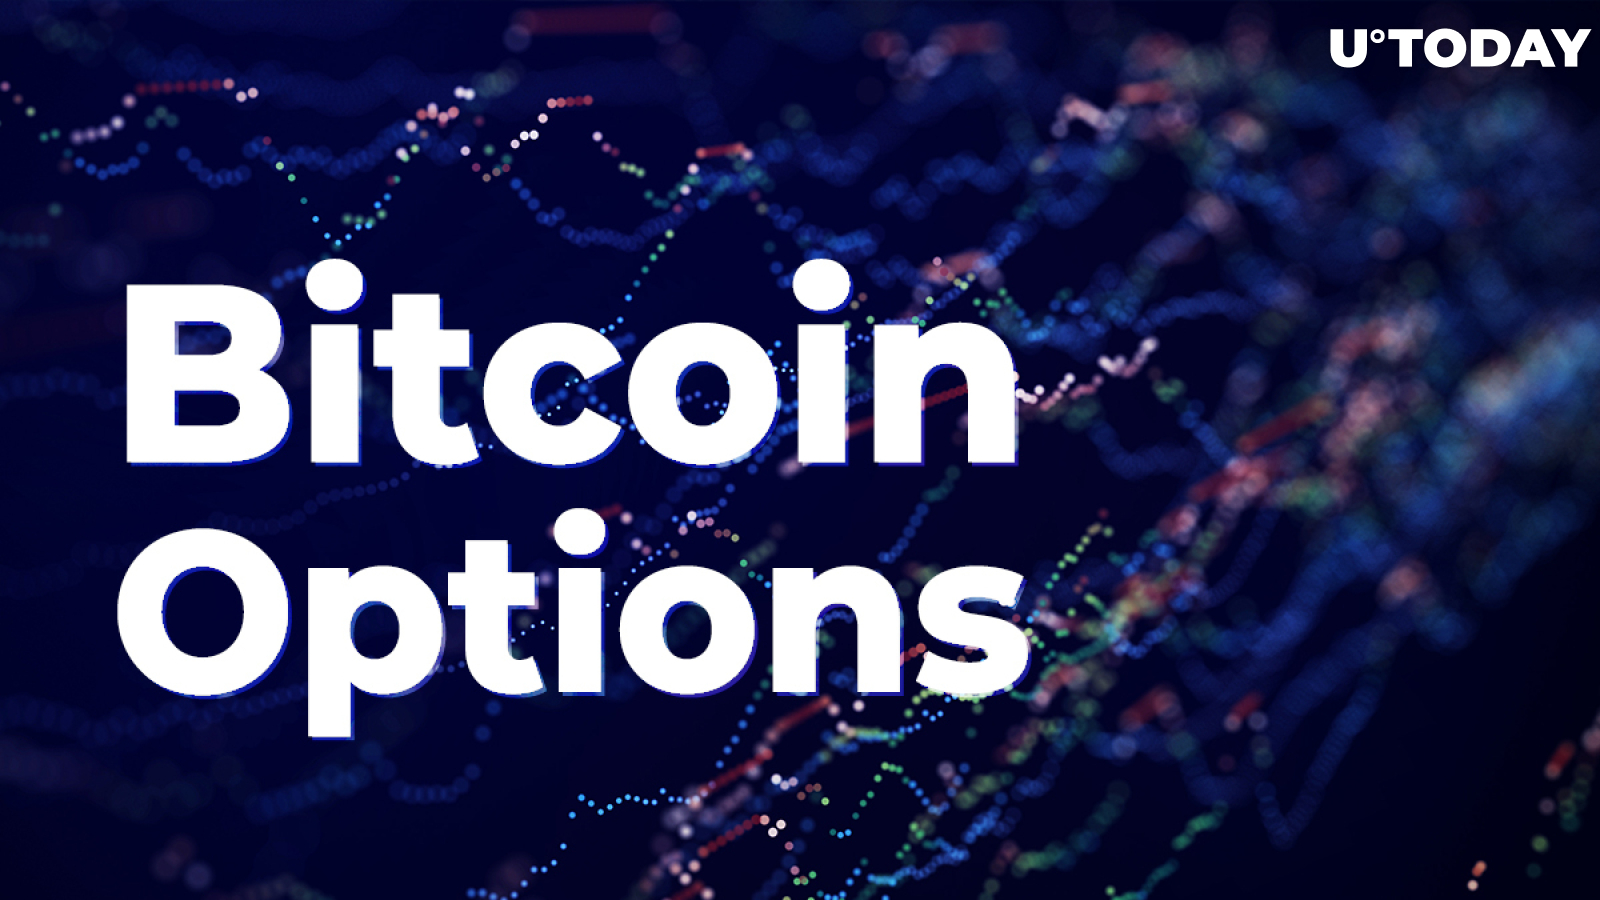 $1.3 Billion Worth of Bitcoin Options to Expire Later Today: Skew Data